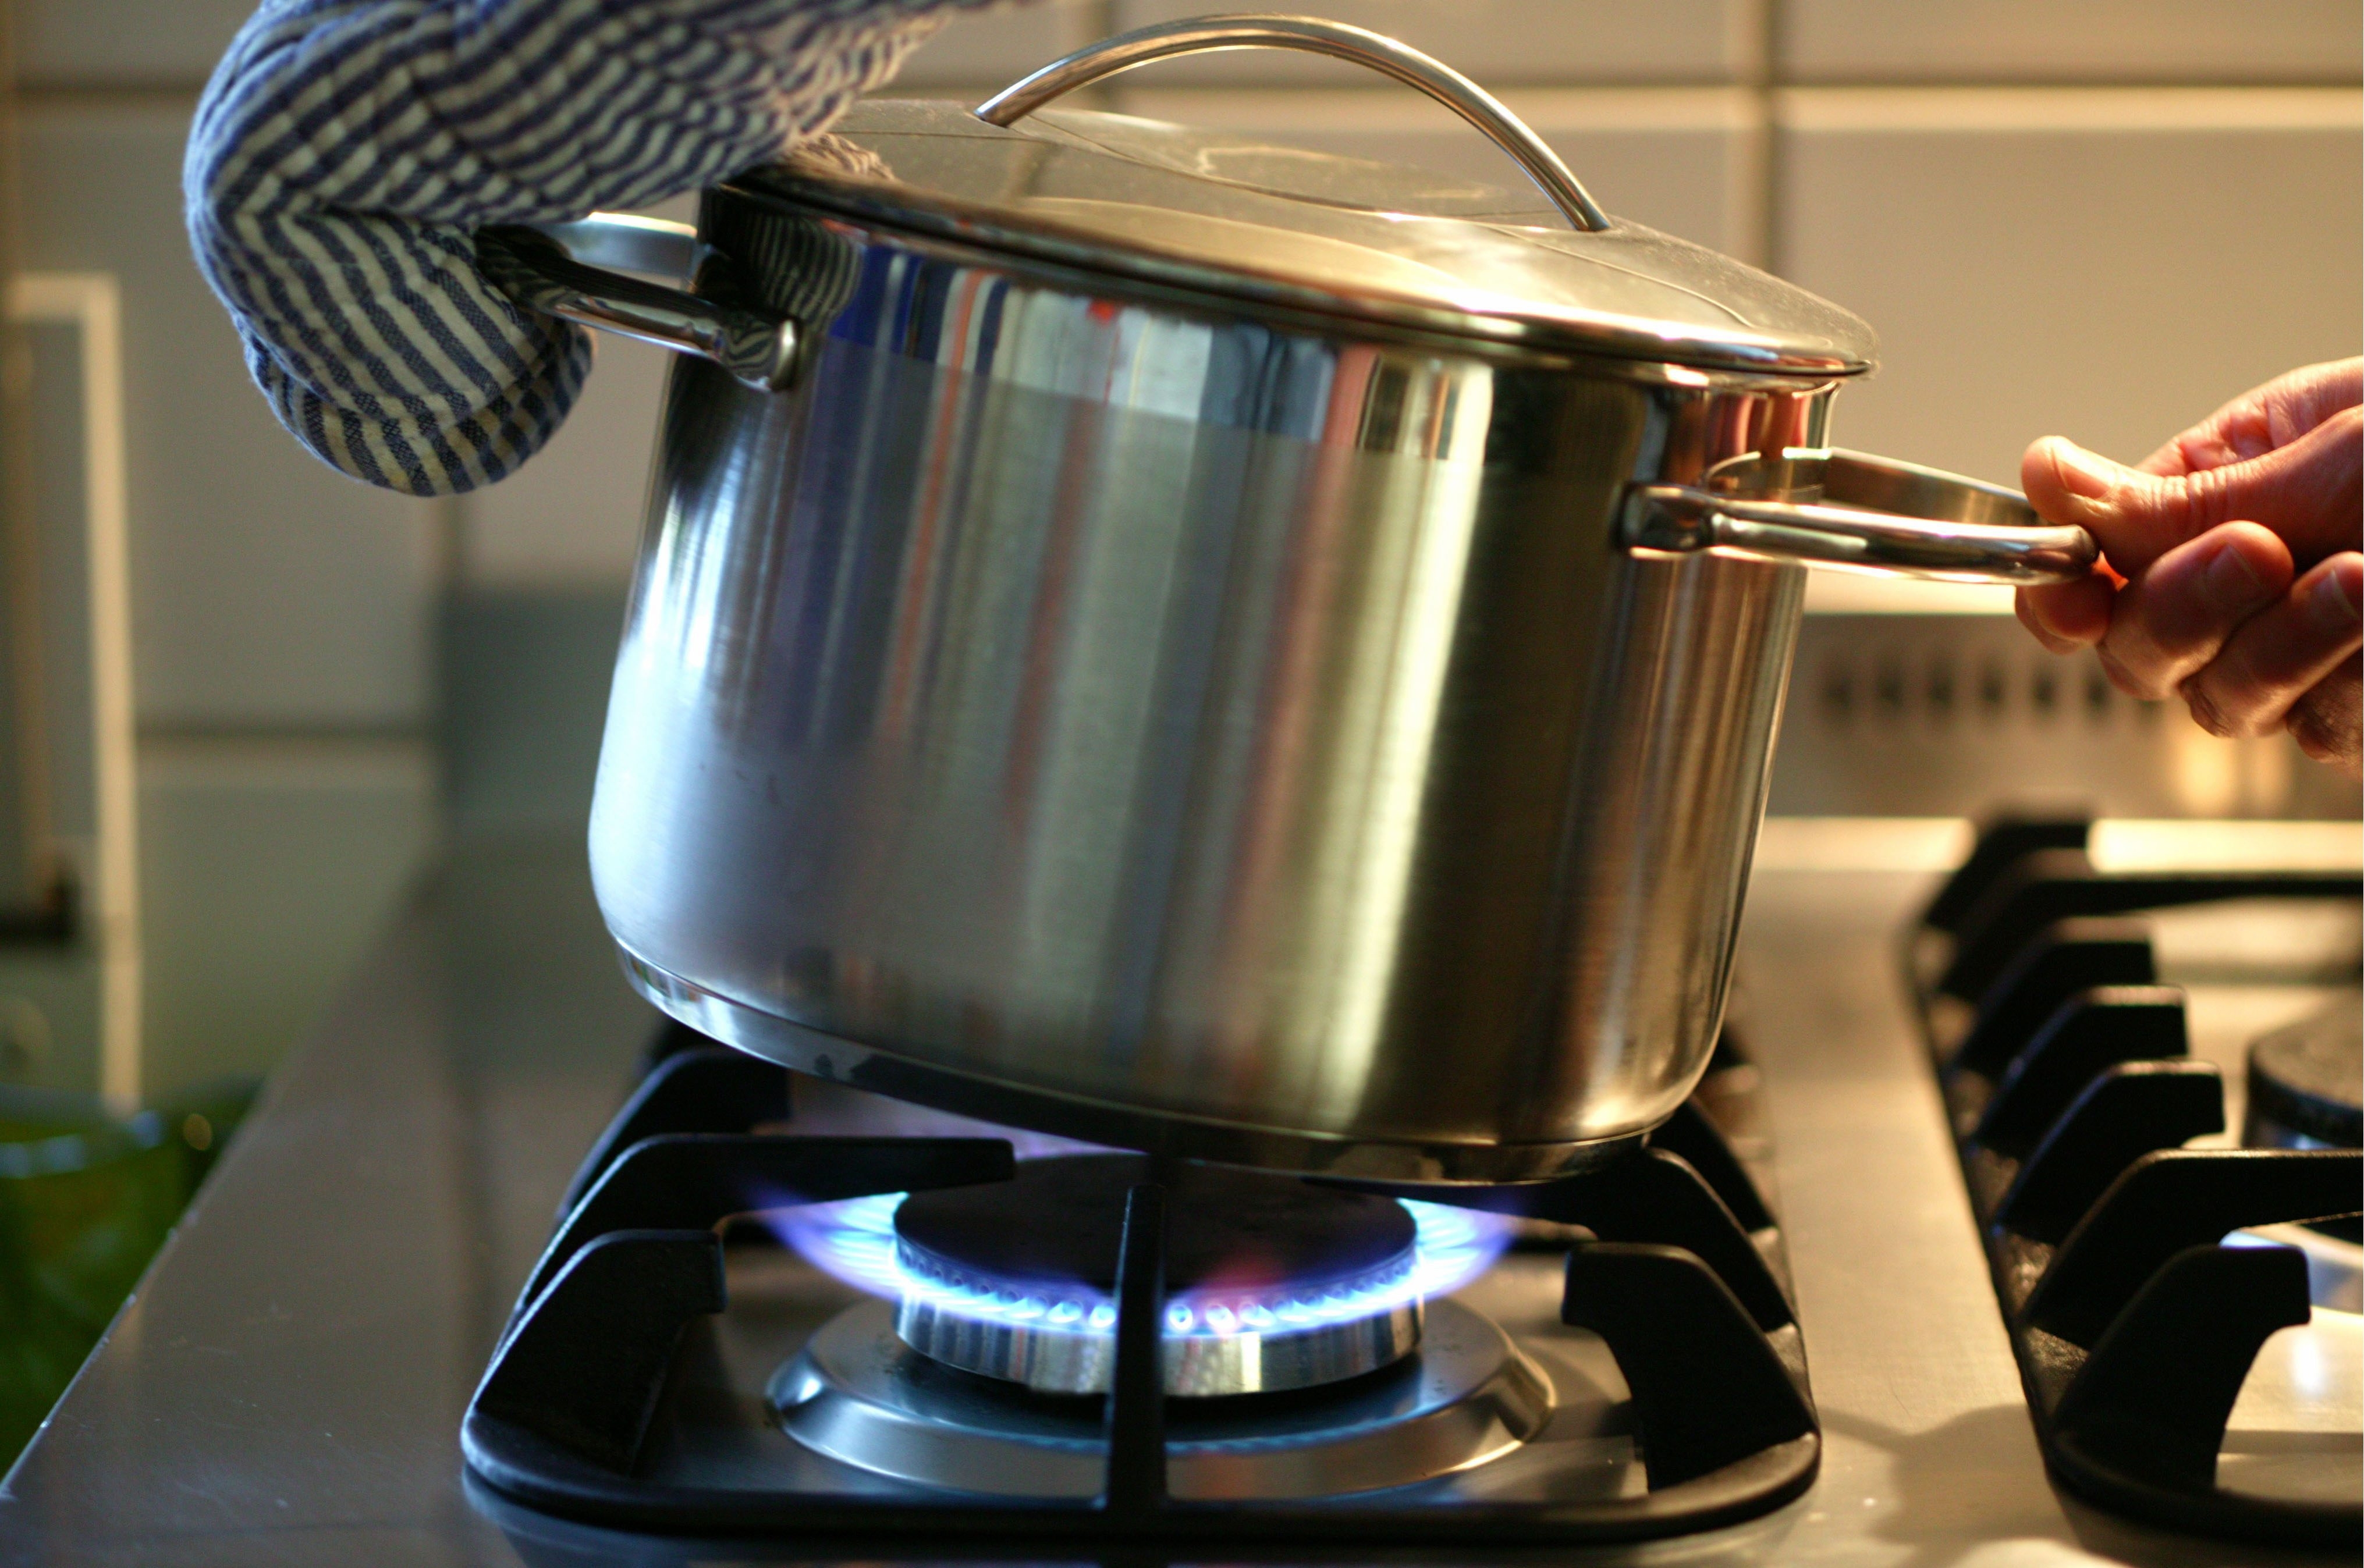 Gas stoves: Why did they become the pariah du jour?